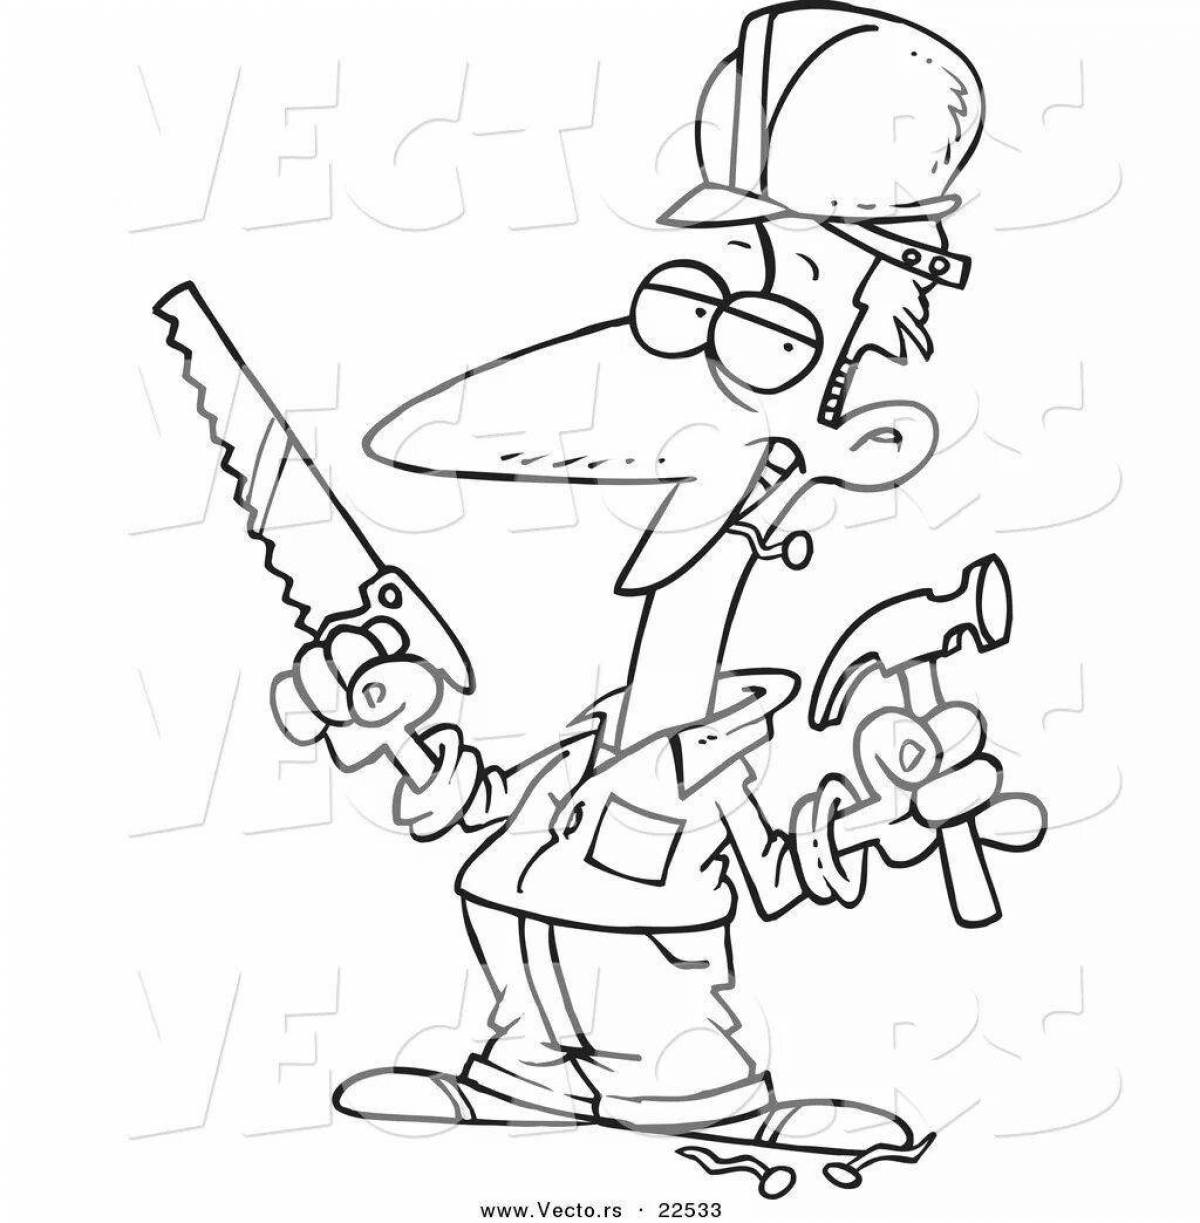 Attractive welder coloring page